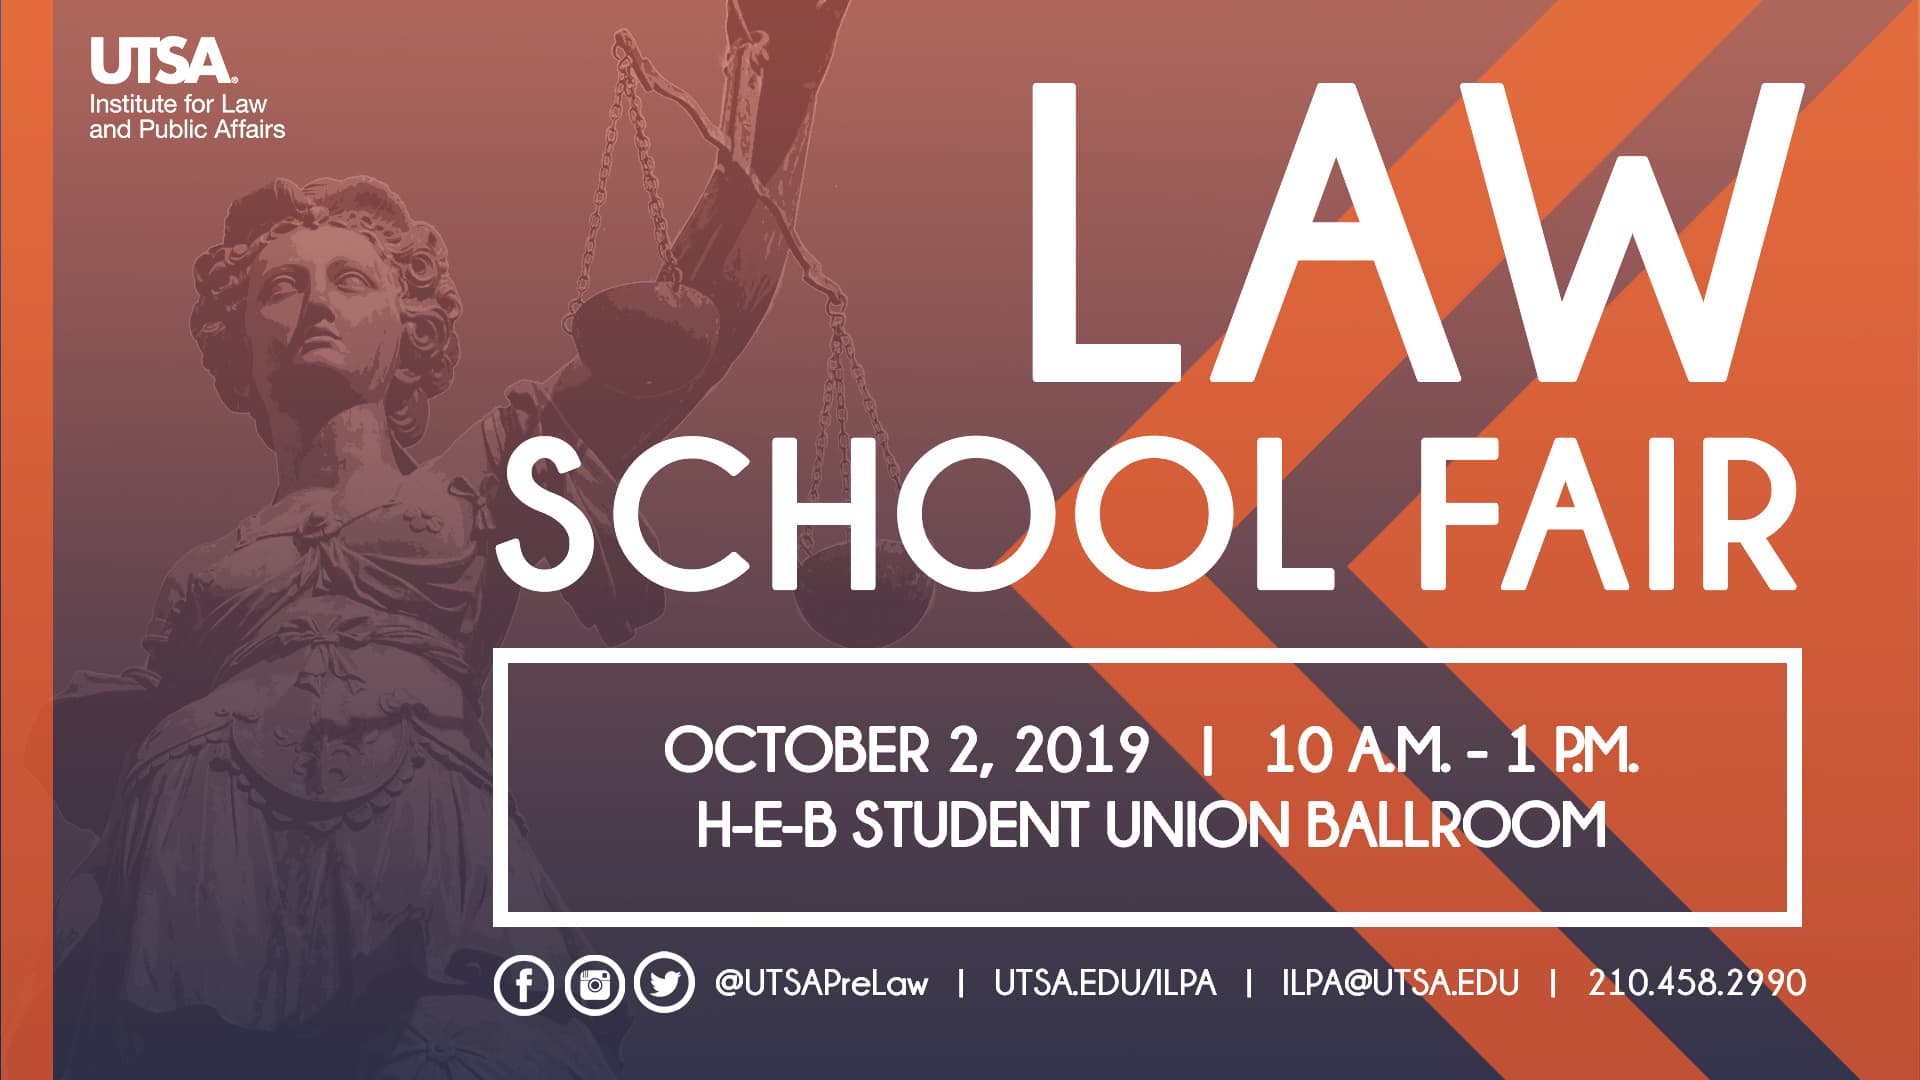 Law School Fair The Institute for Law and Public Affairs UTSA